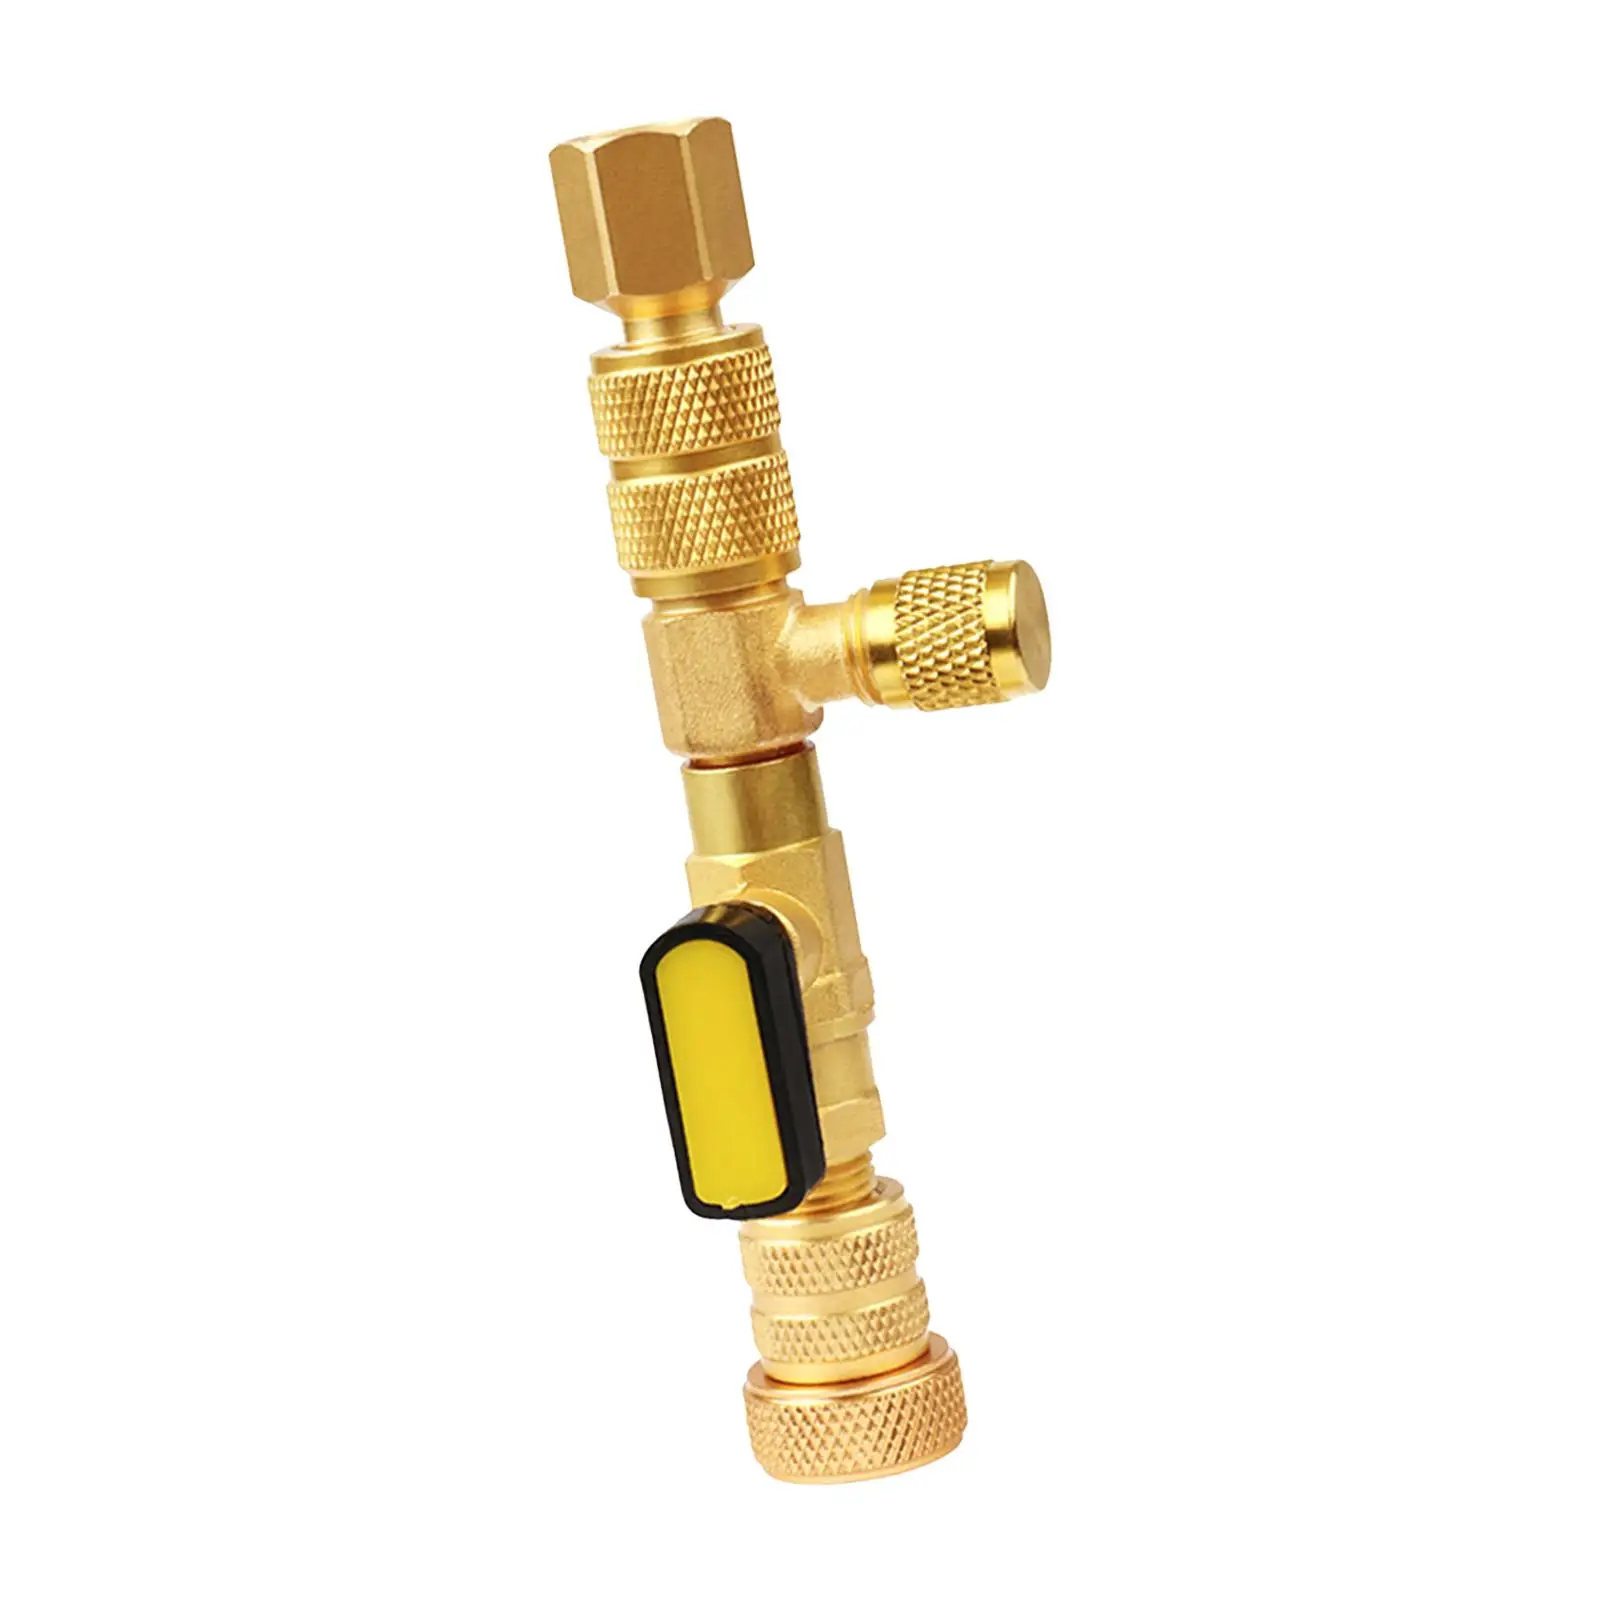 Valve Core Remover Installer Universal Durable Valve Core Changer Air Conditioning Repair Tools Removal Tool Installer